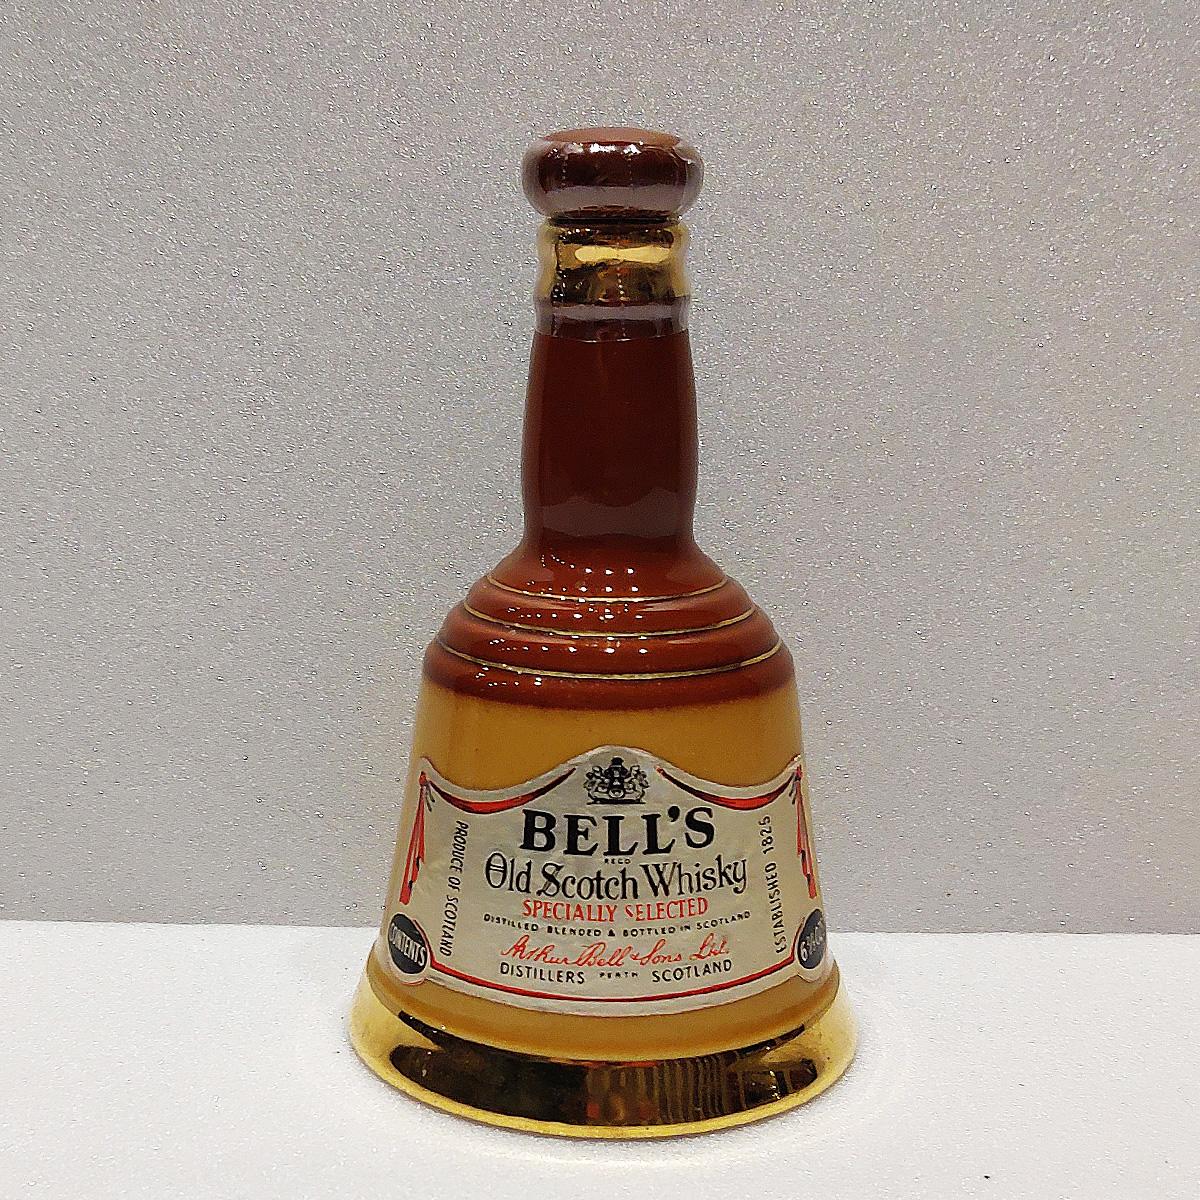 Bells Specially Selected Decanter 1970s 6 23 oz